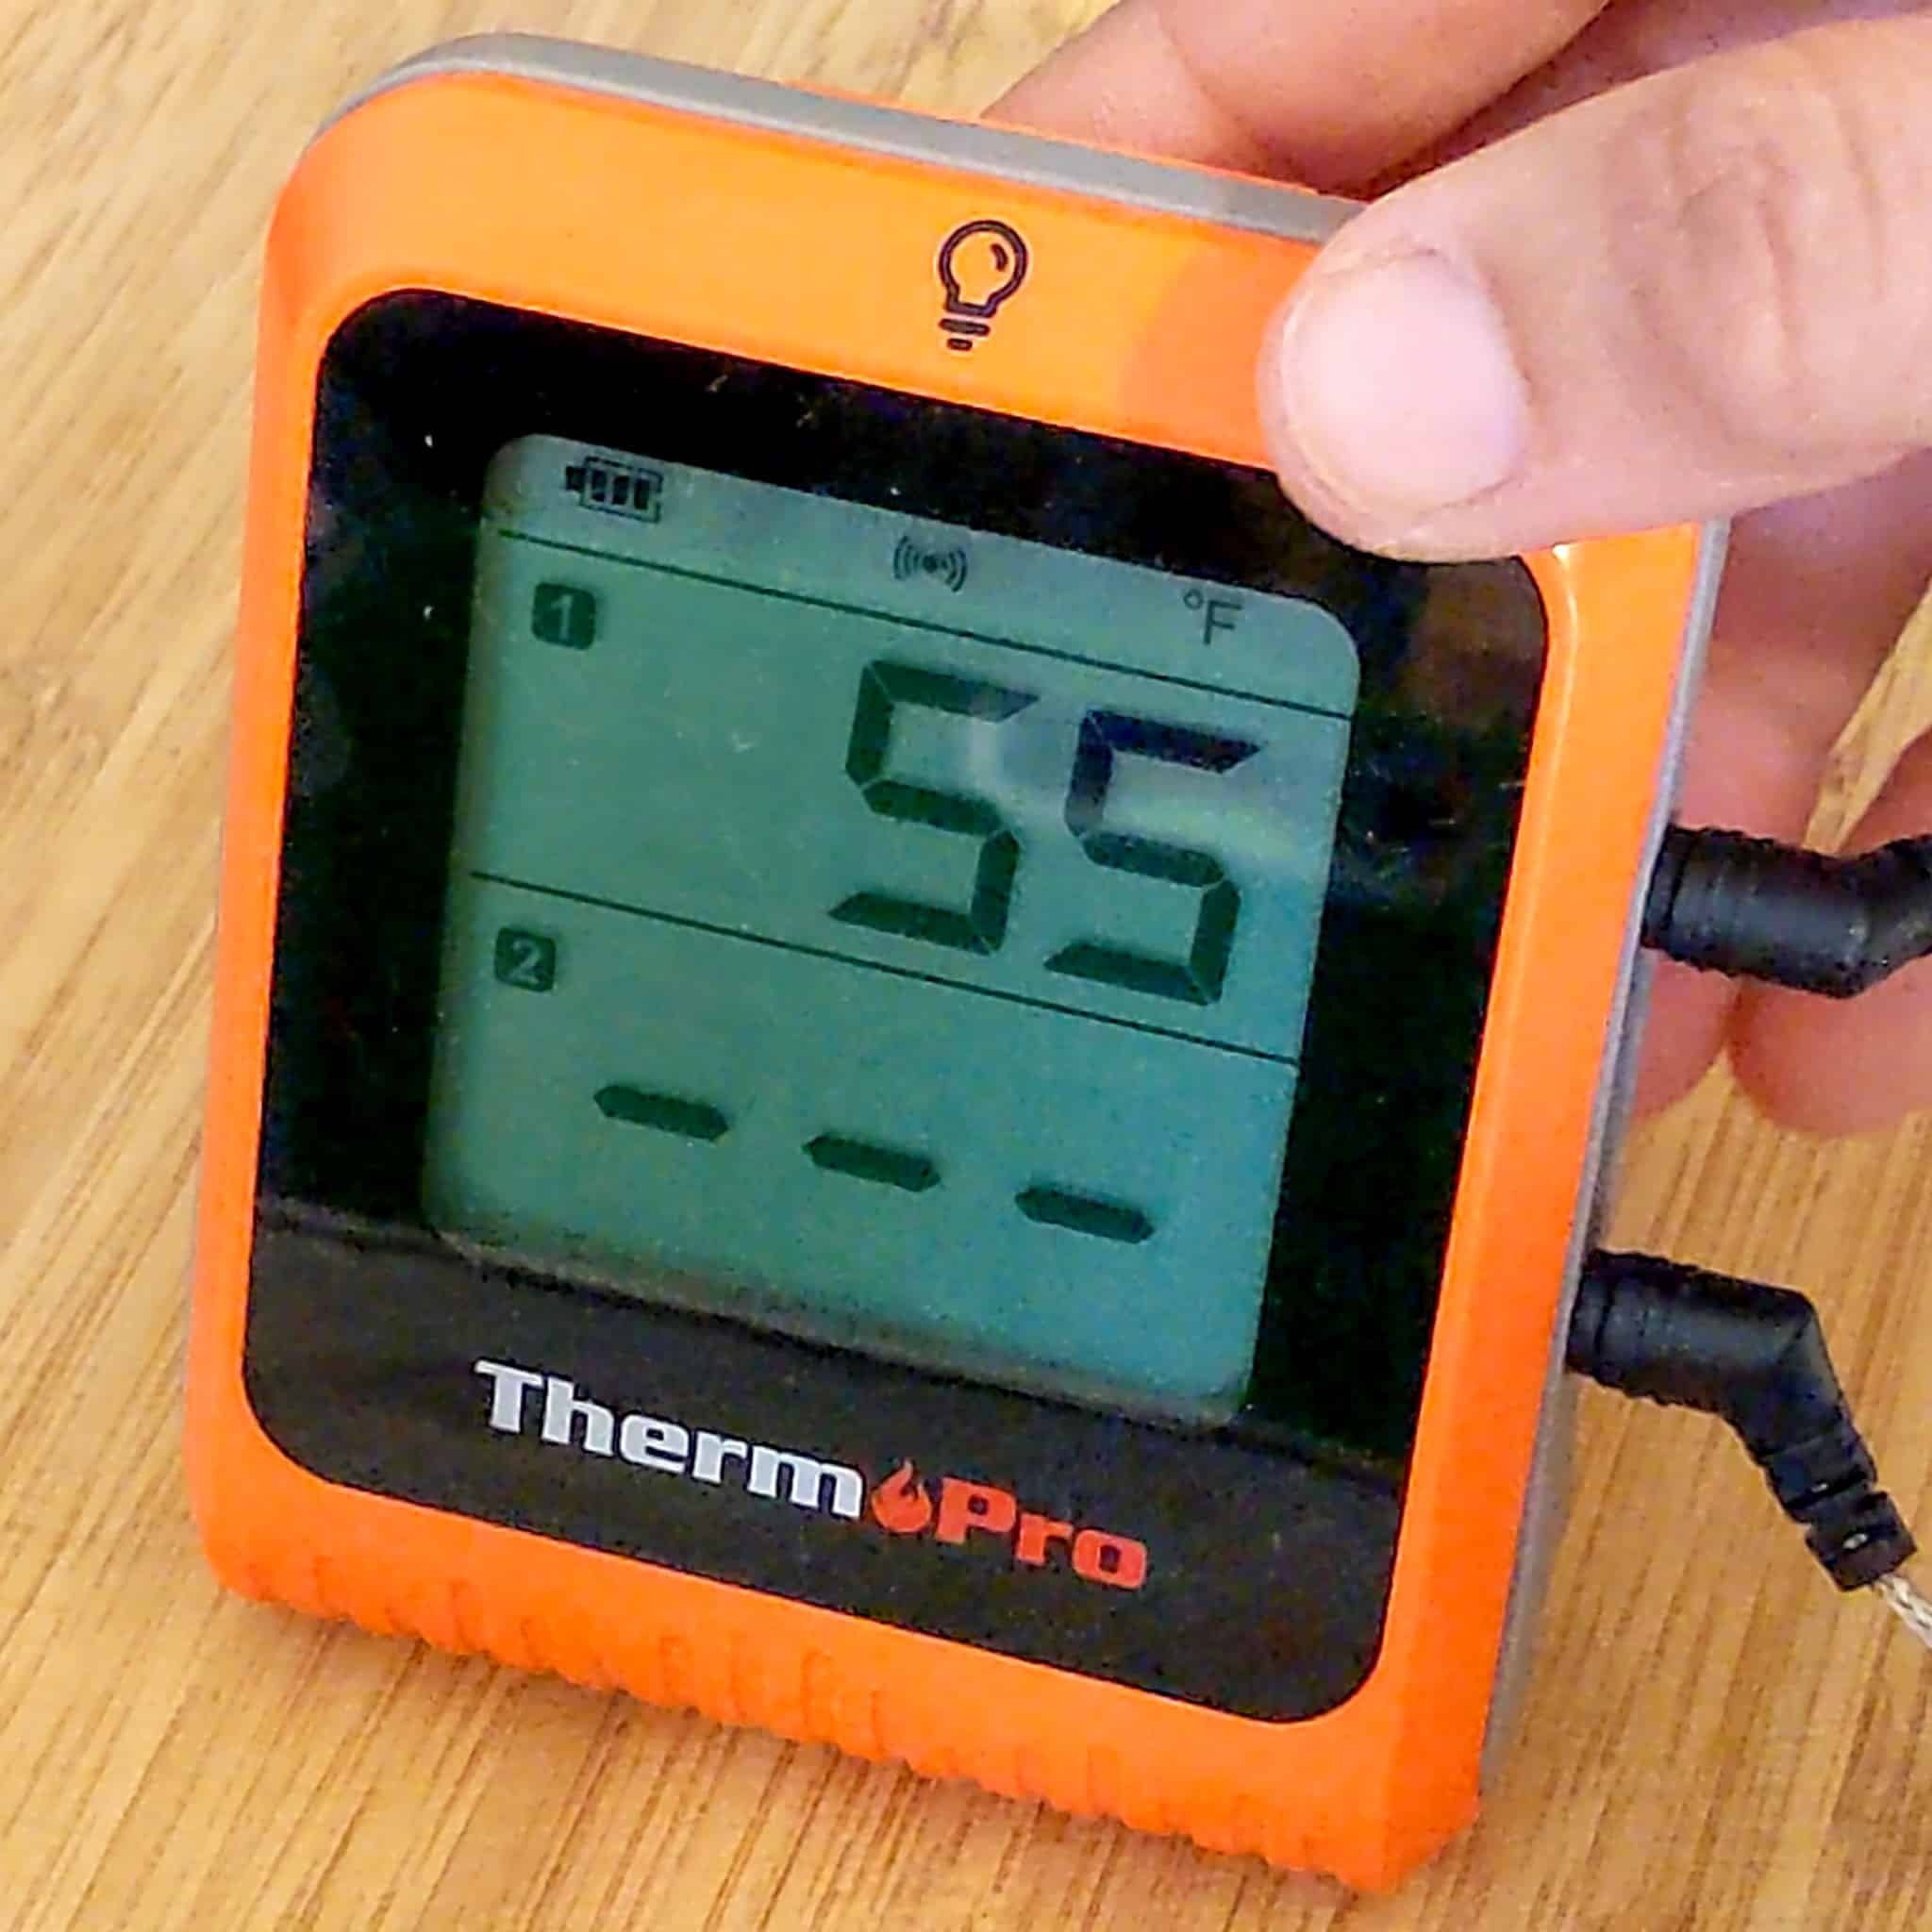 ThermoPro on a cutting board with the display on showing the current chicken's temperature at 55 degrees Fahrenheit